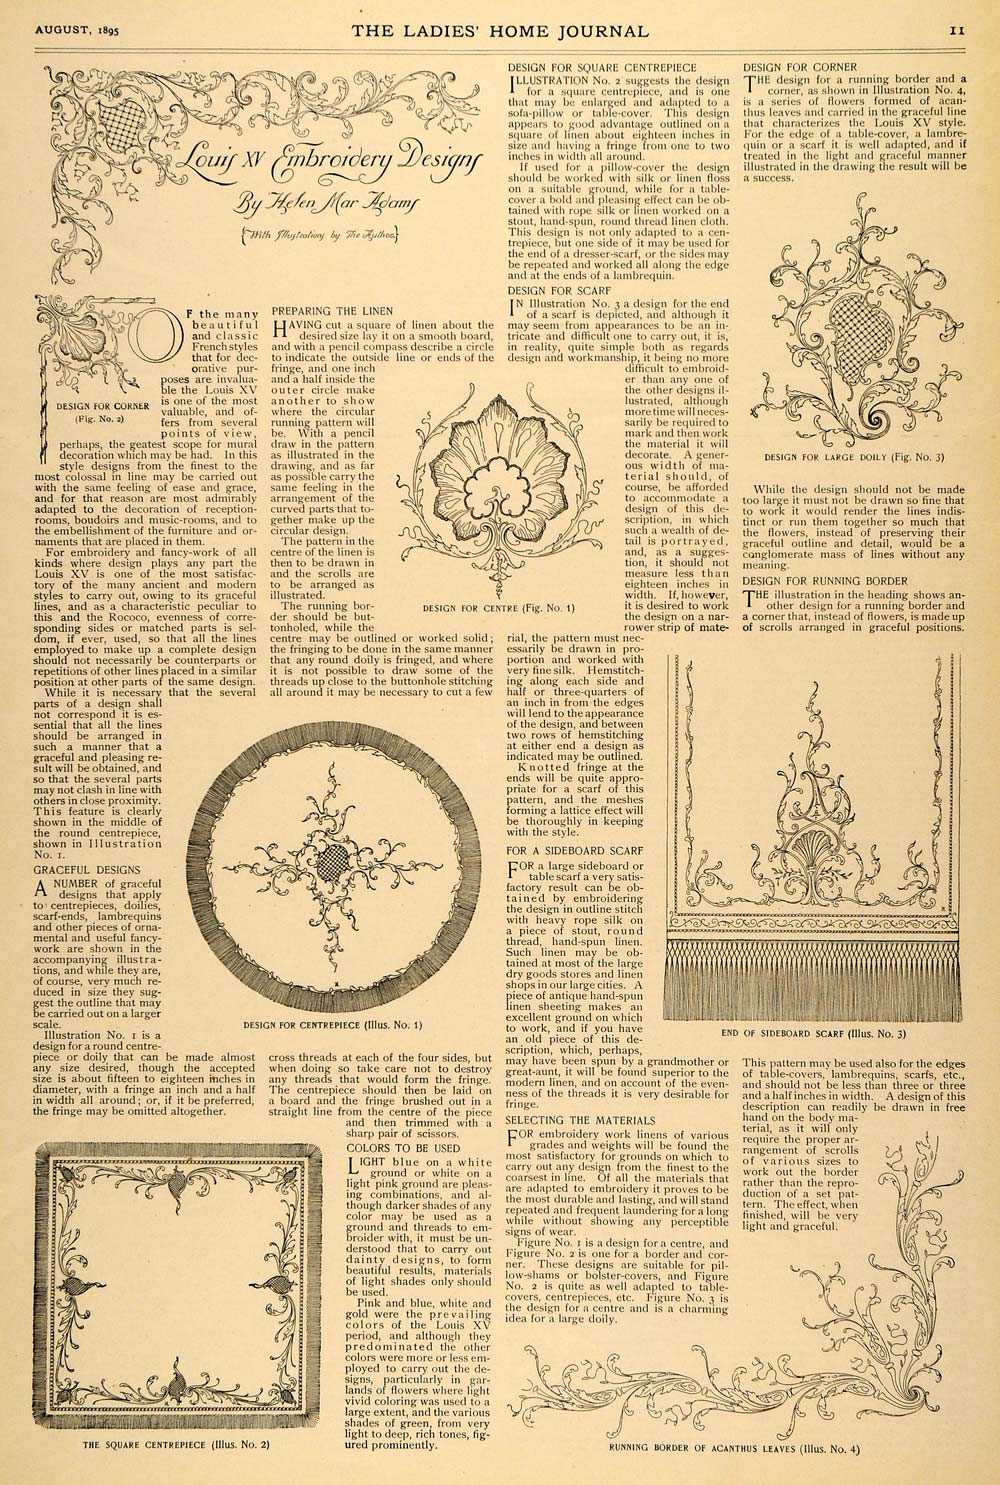 1895 Article Louis XV Embroidery Designs Helen Adams Decoration Doily Lace LHJ5